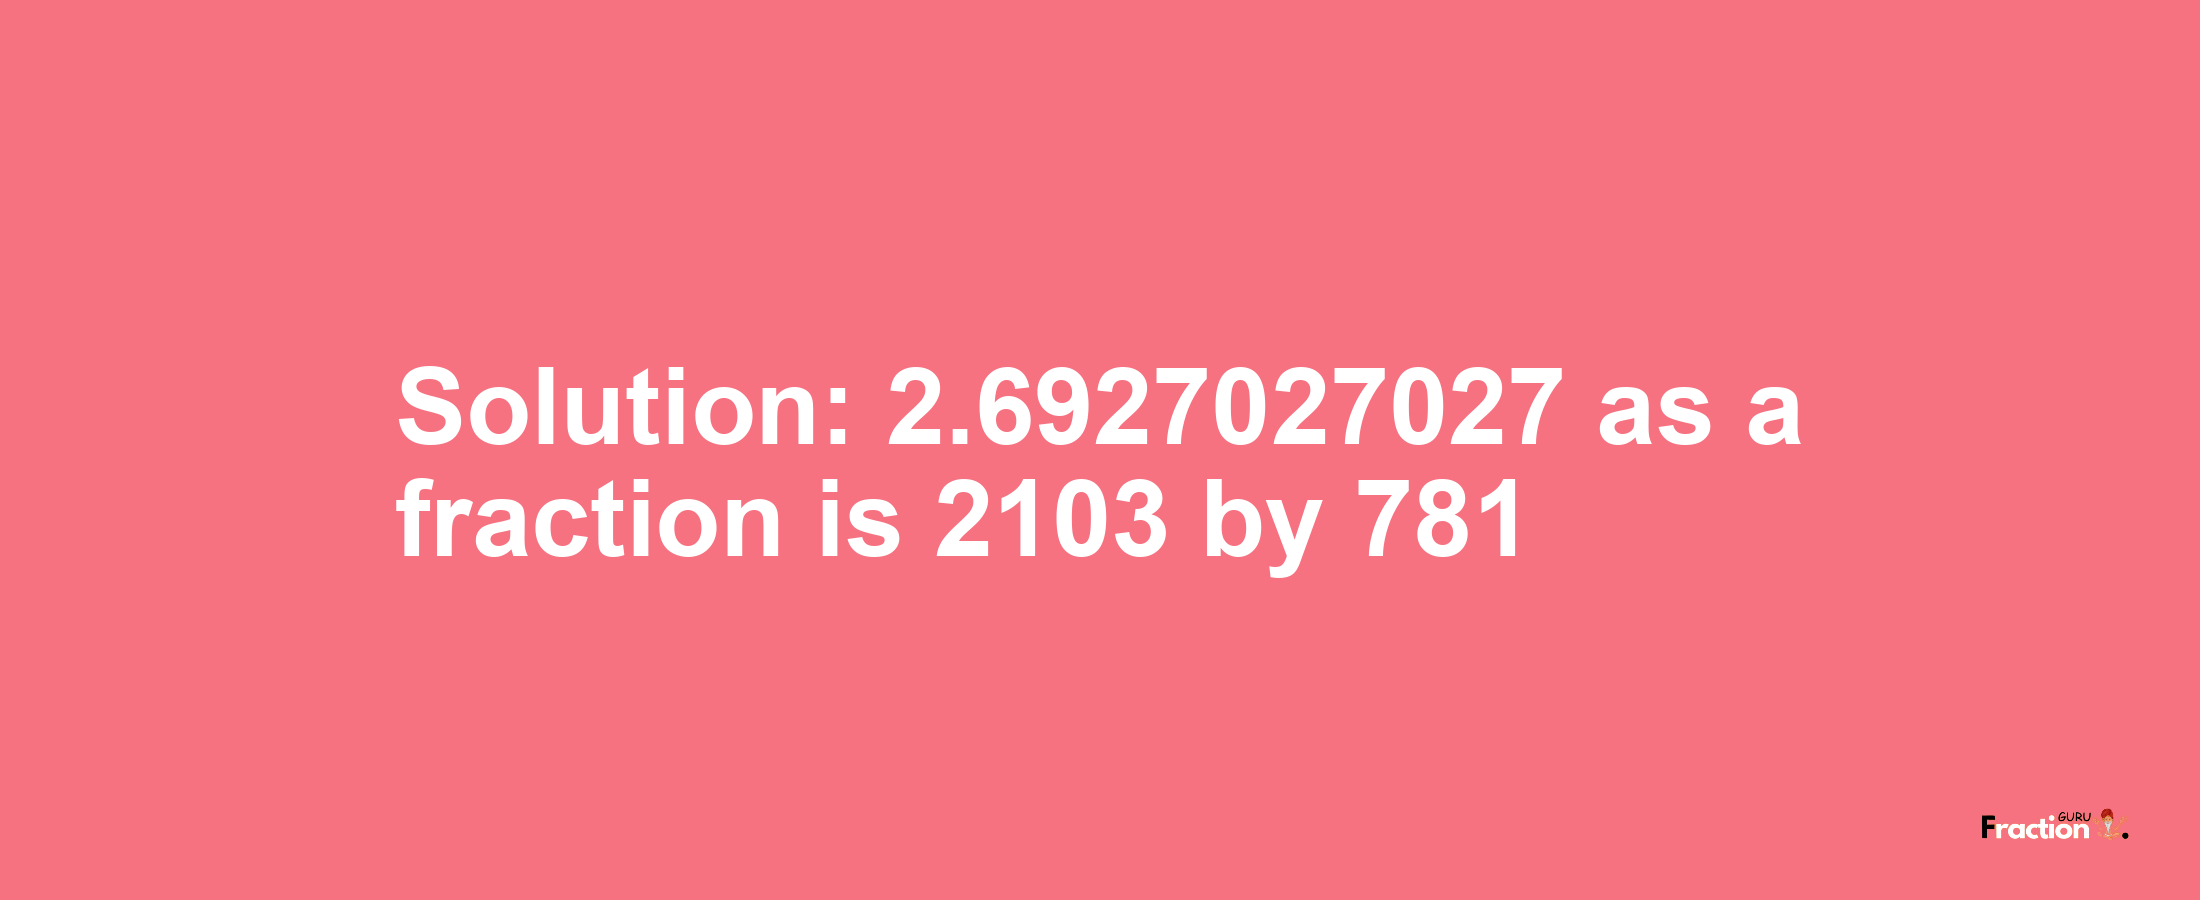 Solution:2.6927027027 as a fraction is 2103/781